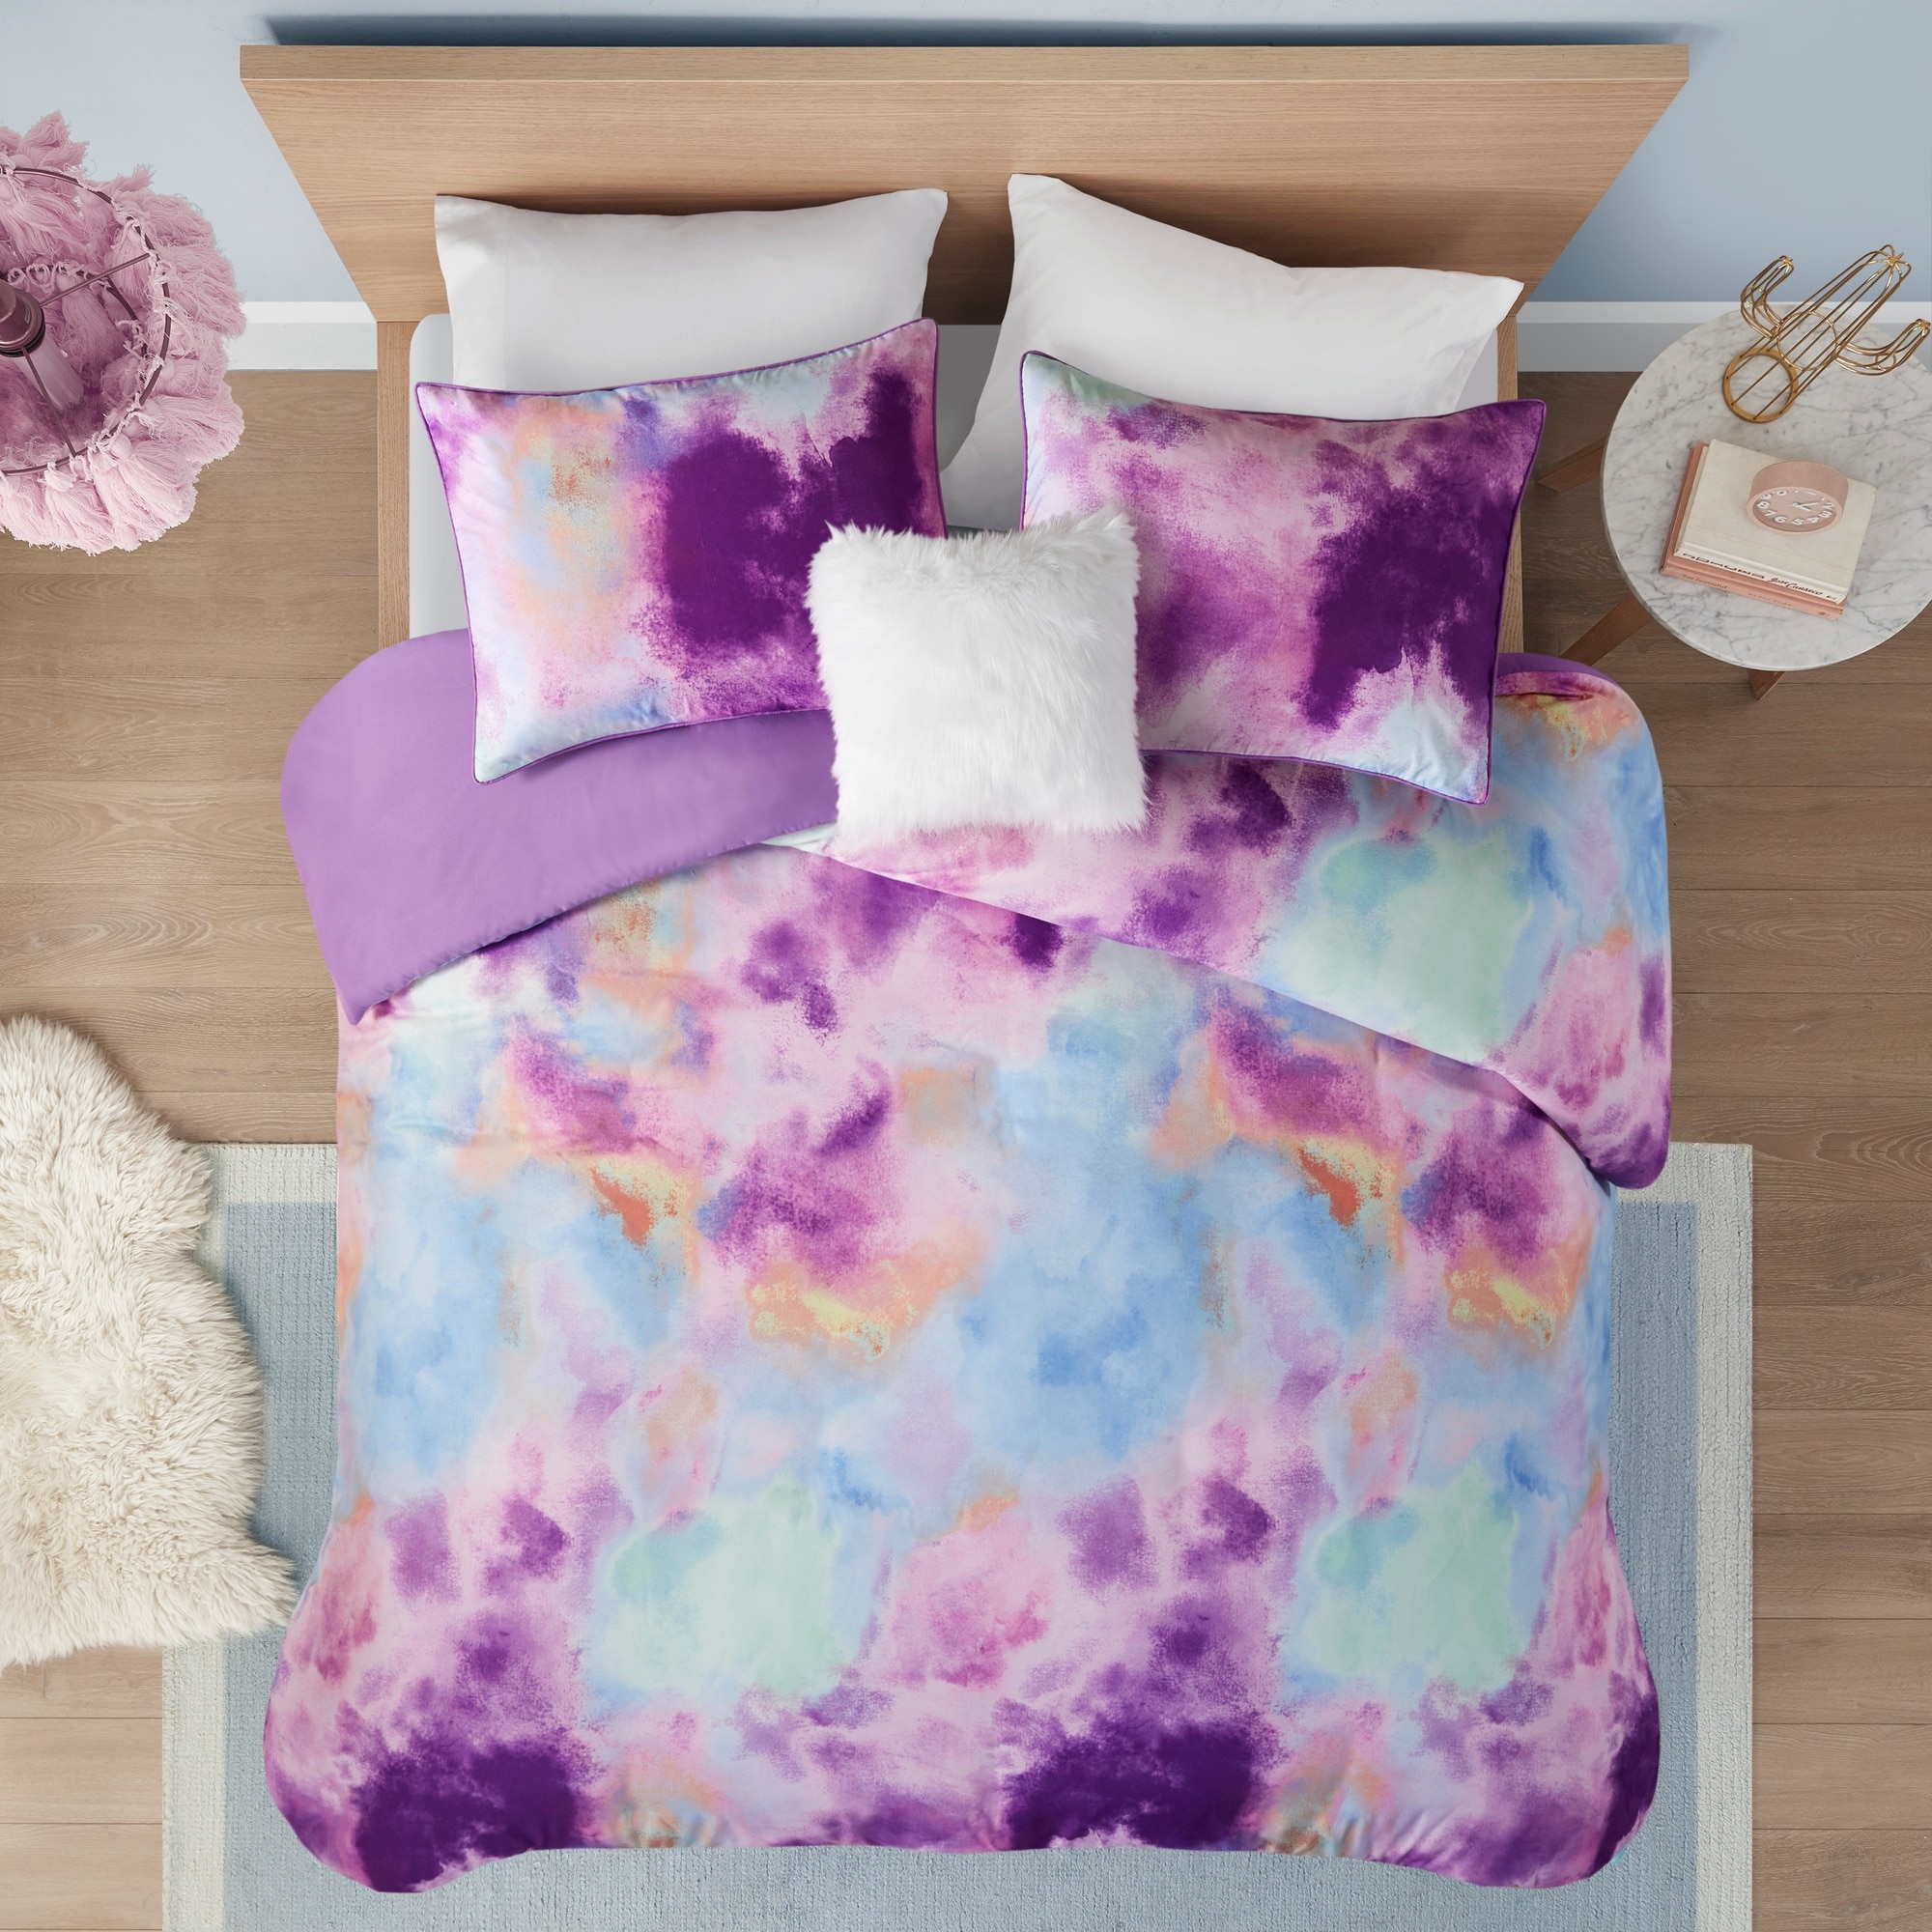 https://ak1.ostkcdn.com/images/products/is/images/direct/6dcc7a4d3180b0e110f8f373d6cdc8a71e1aa779/Intelligent-Design-Karissa-Watercolor-Tie-Dye-Printed-Duvet-Cover-Set-with-Throw-Pillow.jpg